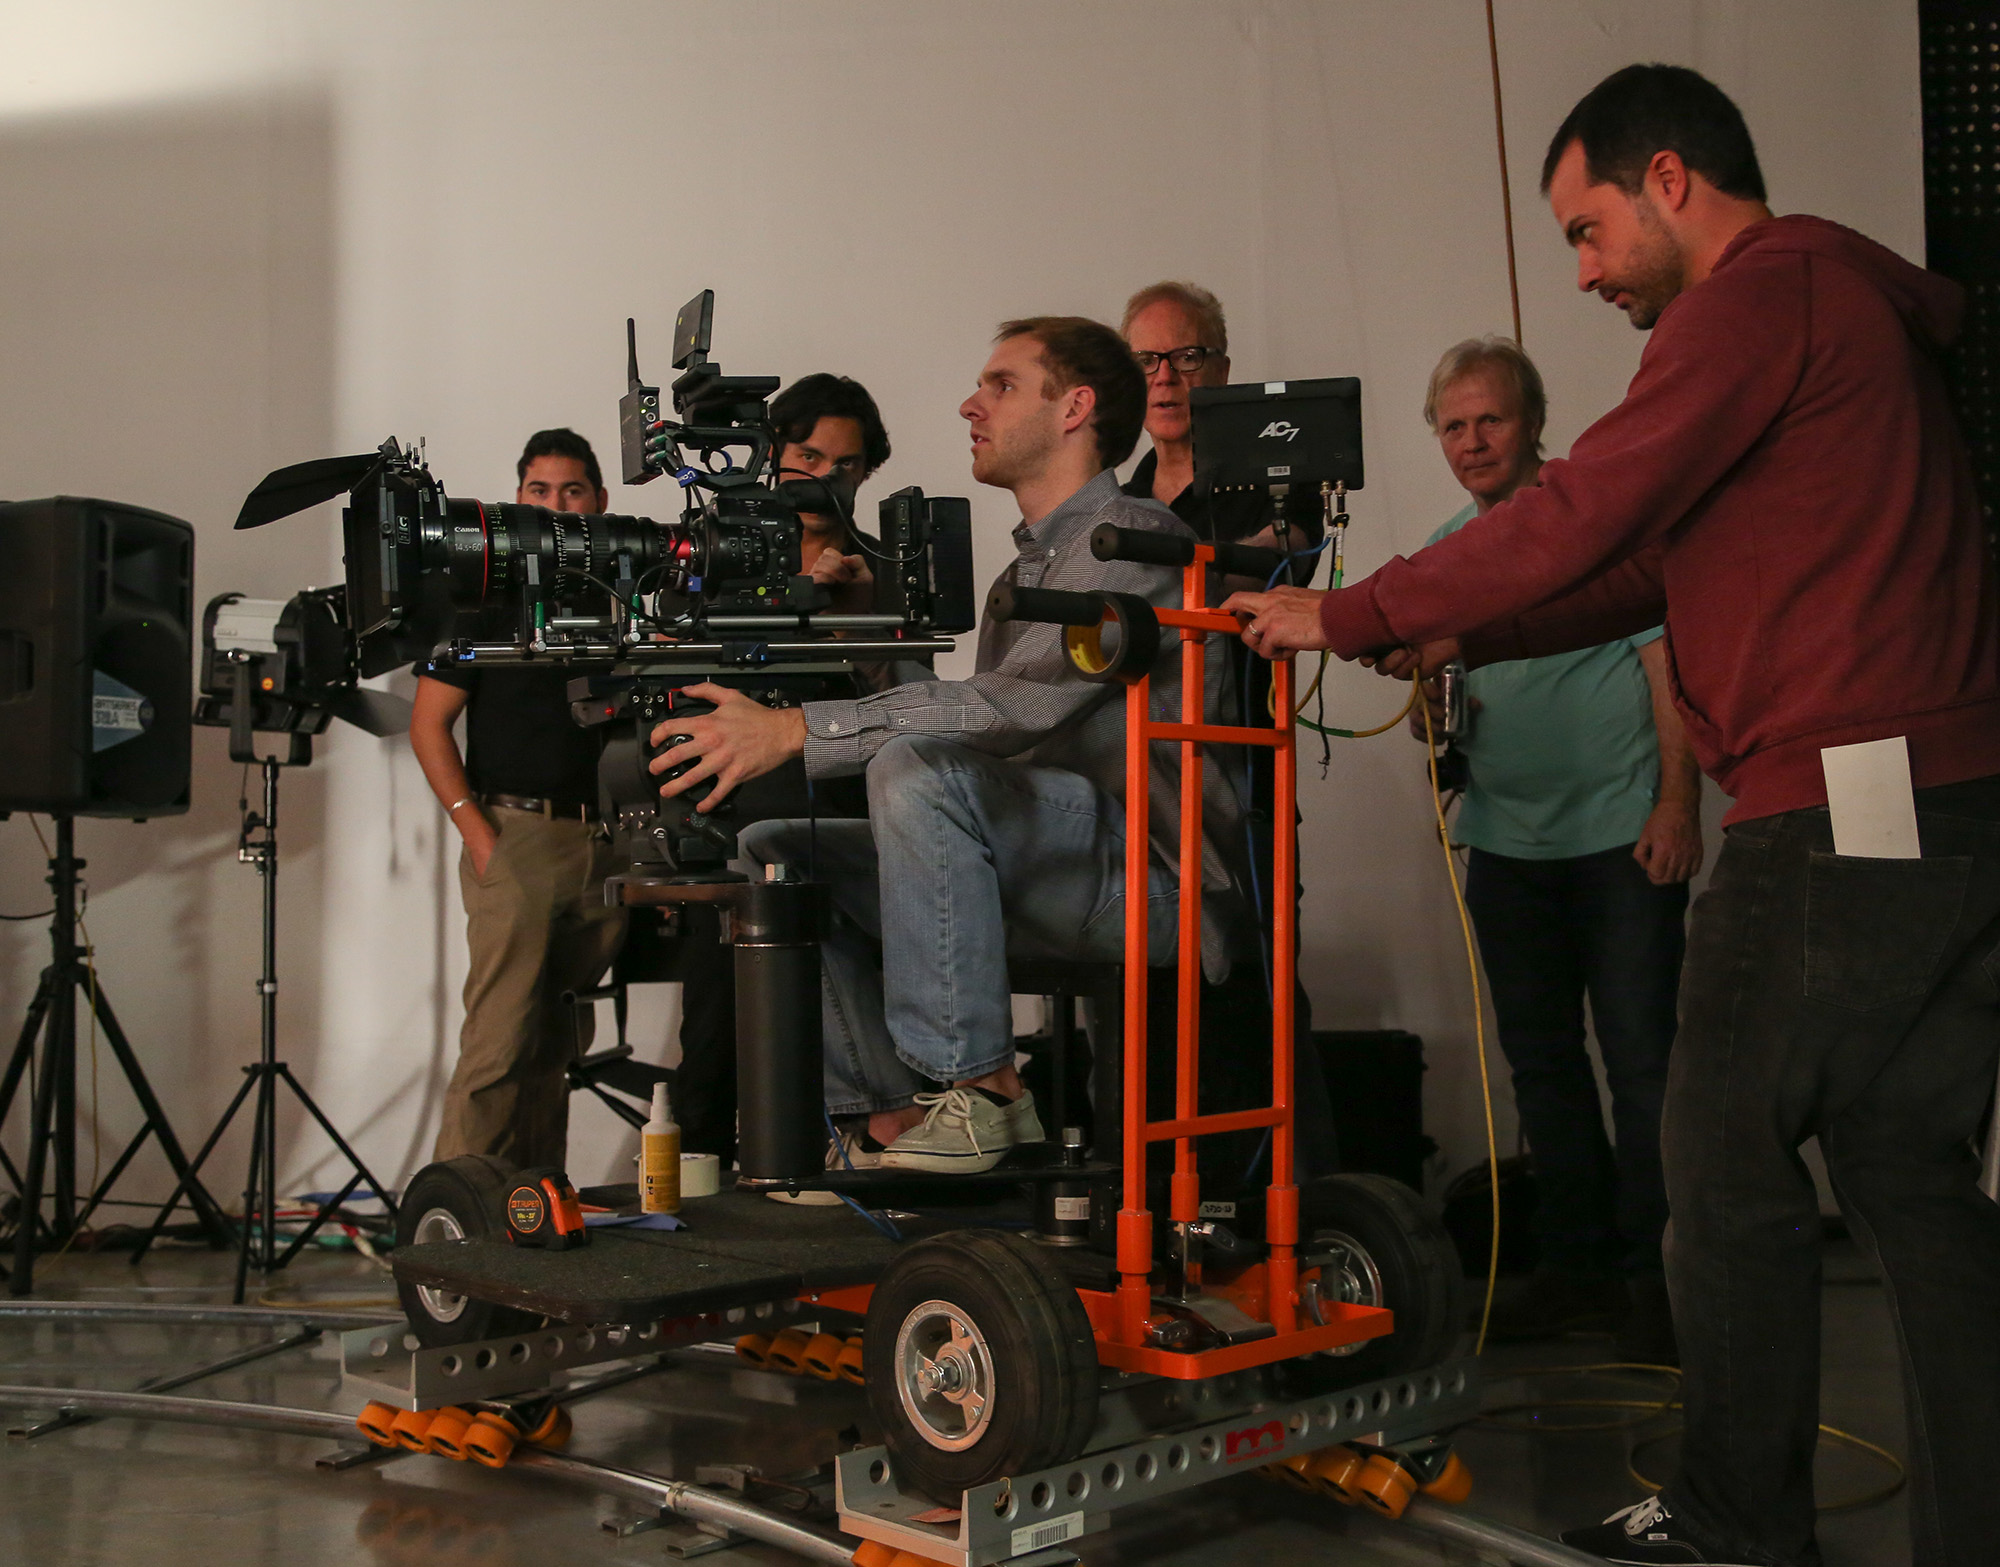 Crudo and Kenny (in background) watch students execute a dolly move. (Photo: Alex Beatty)